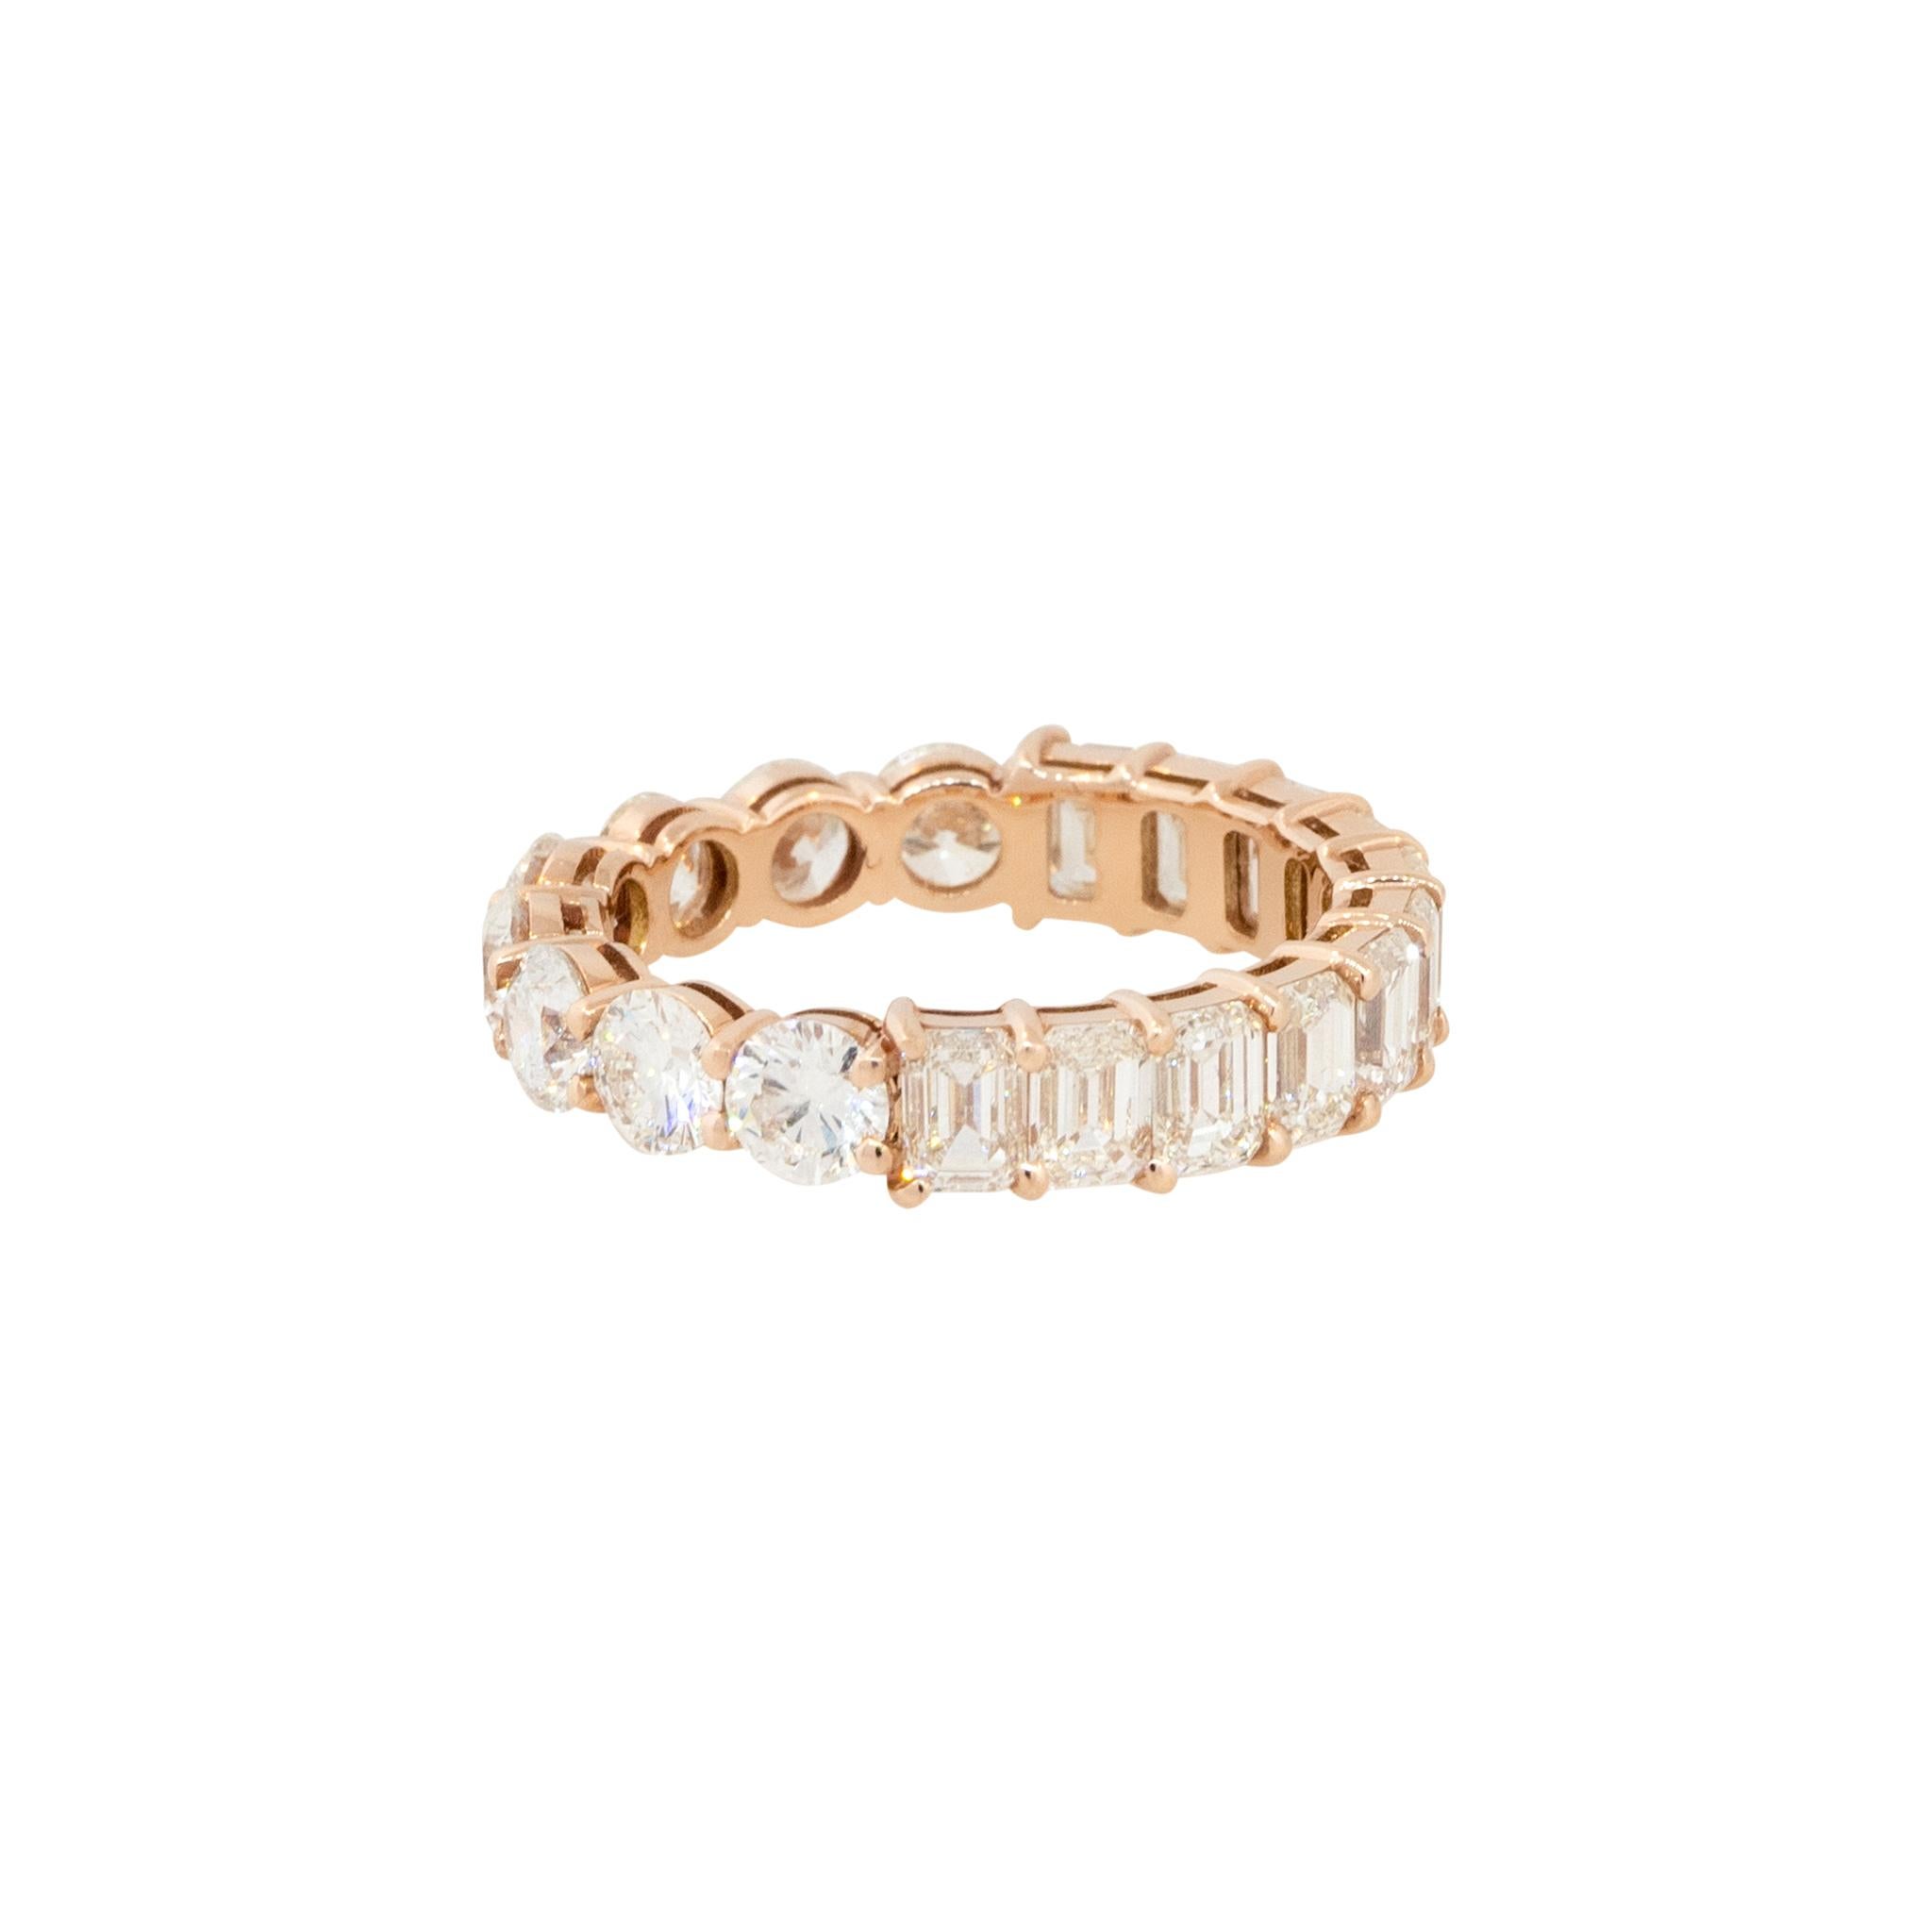 14k Rose Gold 4.62ctw Round and Emerald Cut Diamond Eternity Band Ring

Material: 14k Rose Gold
Diamond Details: Approx. 4.62ctw of Round and Emerald Cut Diamonds. There are 16 Diamonds total. Diamonds are approx. G/H in color and VS/SI in